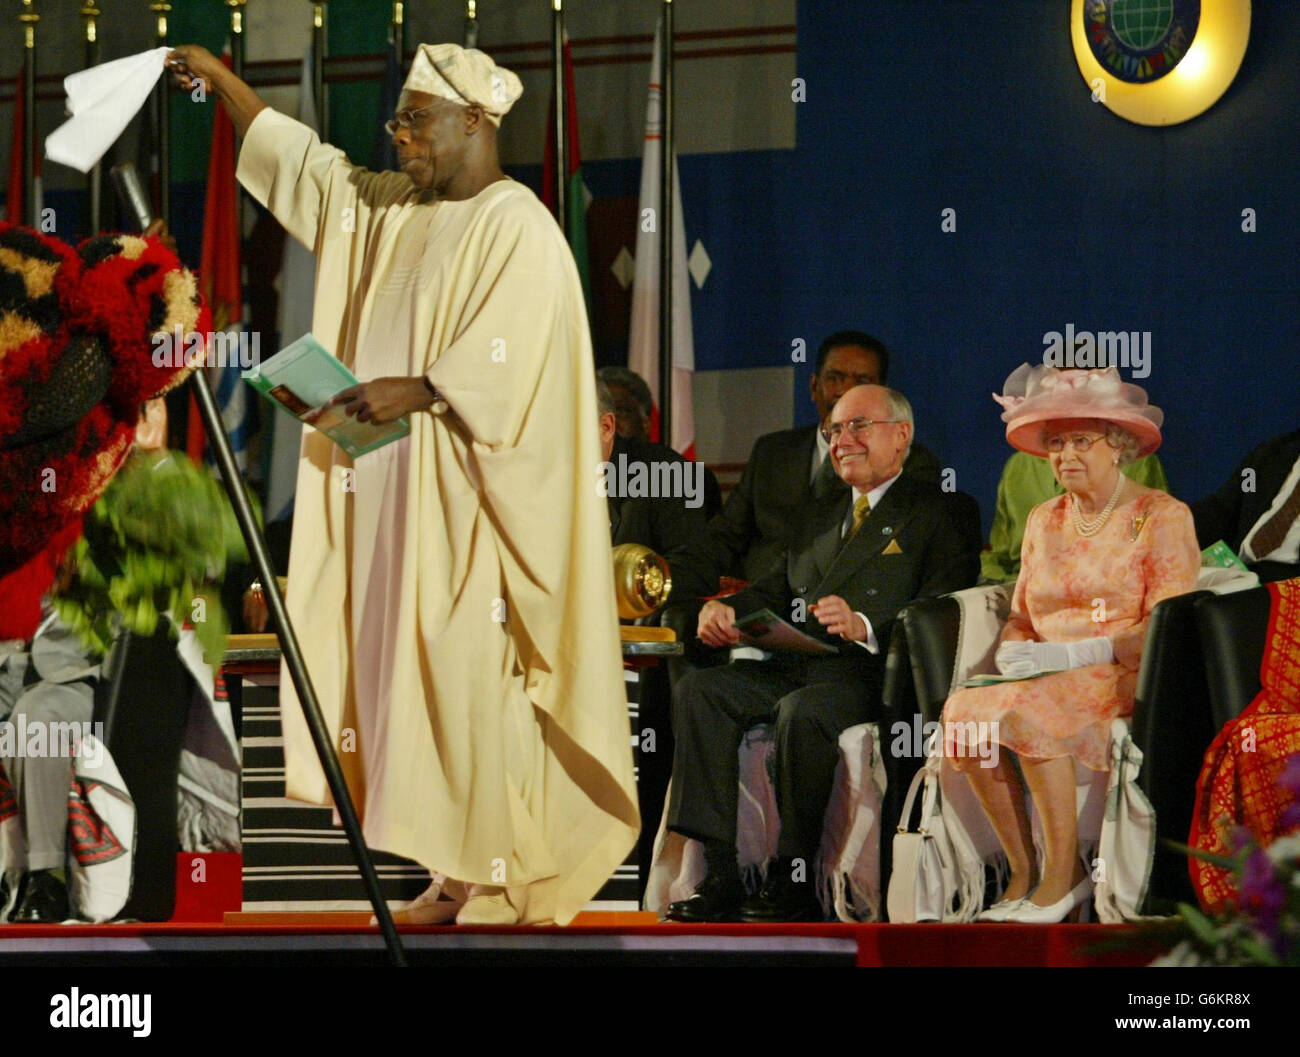 Britain's Queen Elizabeth II watches as Nigeria's President, Olusegun Obasanjo, holds up a white cloth as a symbol of peace during the opening session of the Commonwealth Summit in Abuja, Nigeria. * The Queen addressed the summit attended by political leaders including Prime Minster Tony Blair, as head of the Commonwealth, a worldwide organisation of 54 states. Stock Photo